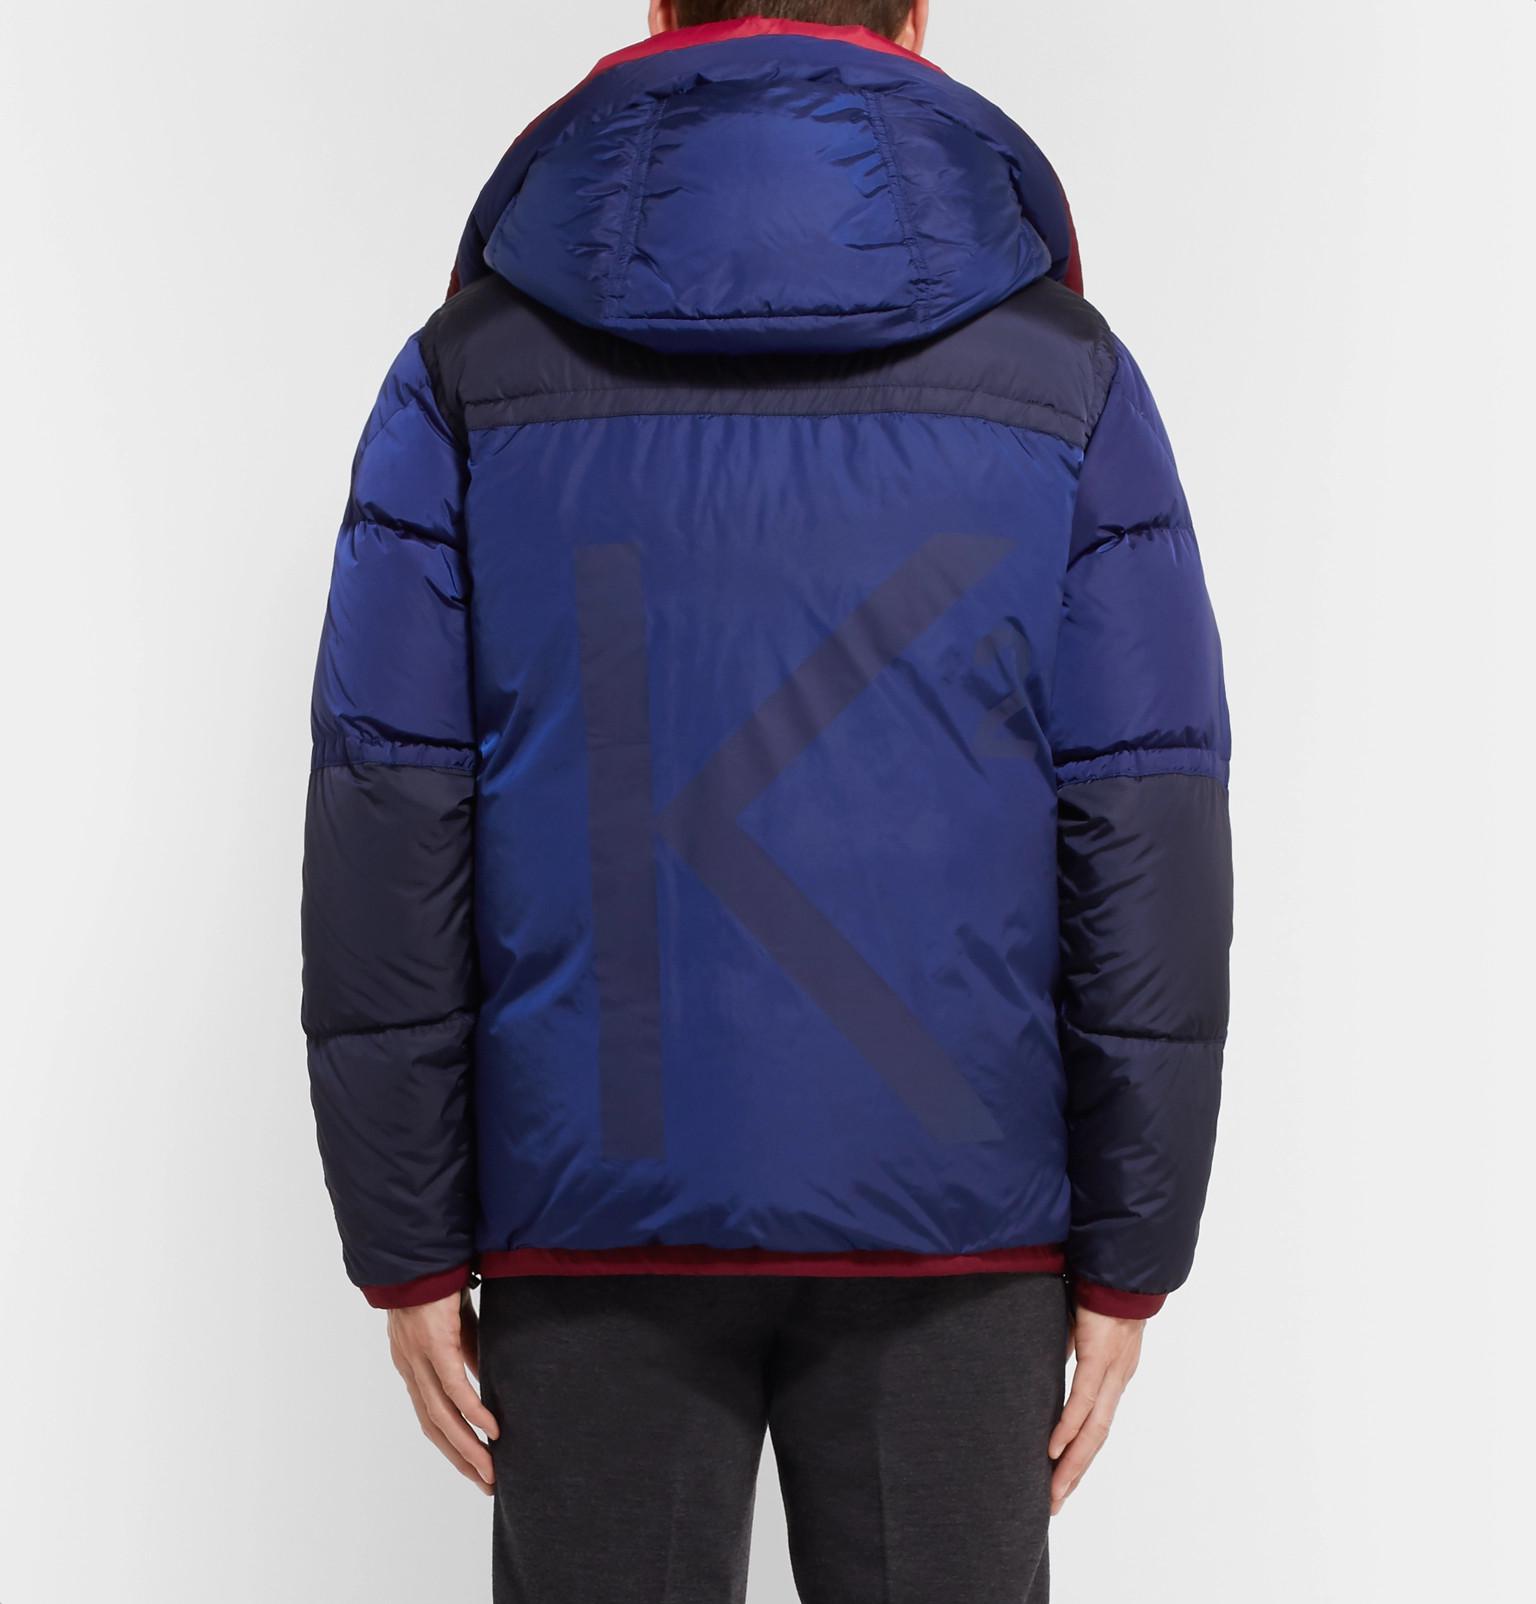 Moncler Empire K2 Panelled Quilted Shell Down Jacket in Blue for Men - Lyst